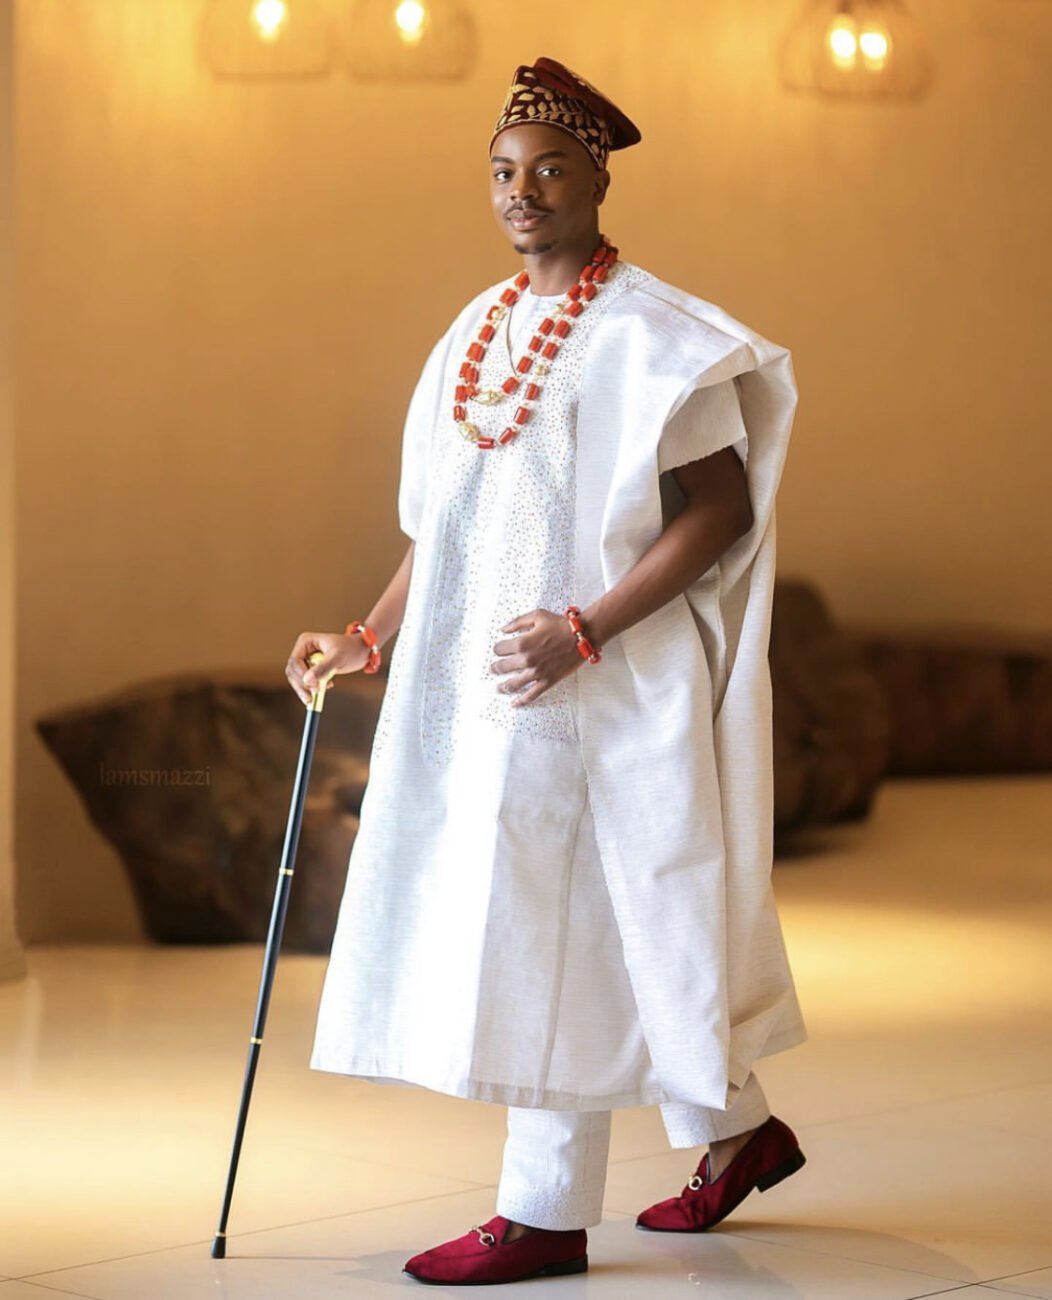 Enioluwa Adeoluwa in an ‘Agbada’ with red shoes, red beads, and a blue walking stick.